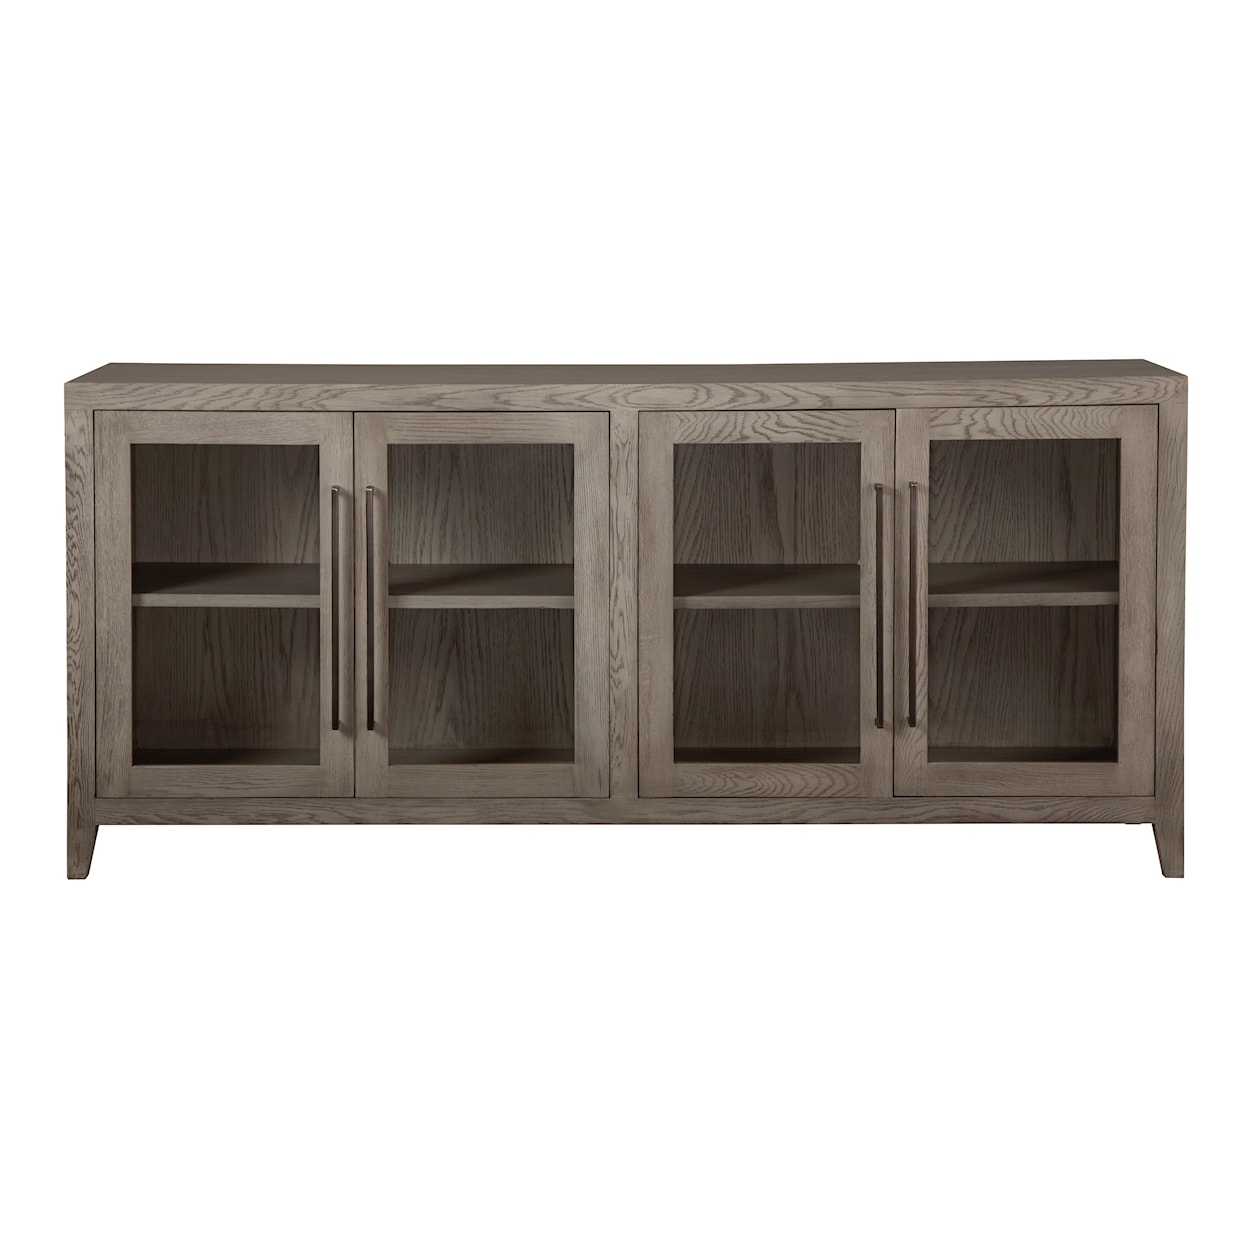 Benchcraft Dalenville Accent Cabinet